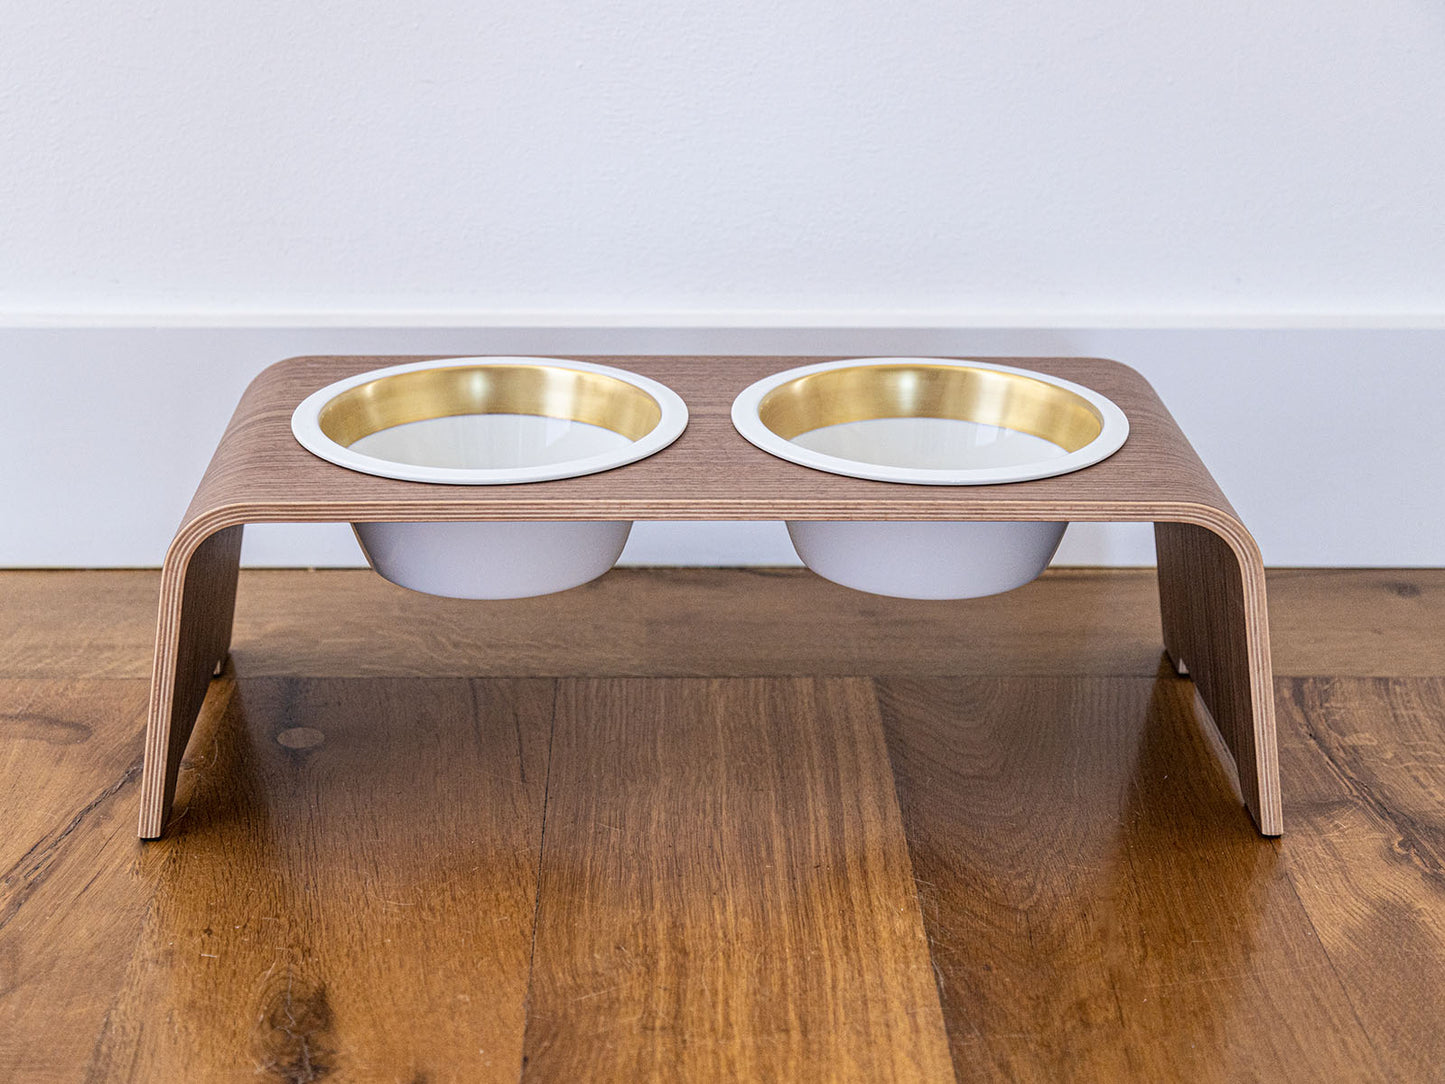 Surcharge GOLD Edition for two porcelain bowls of the dogBar® M